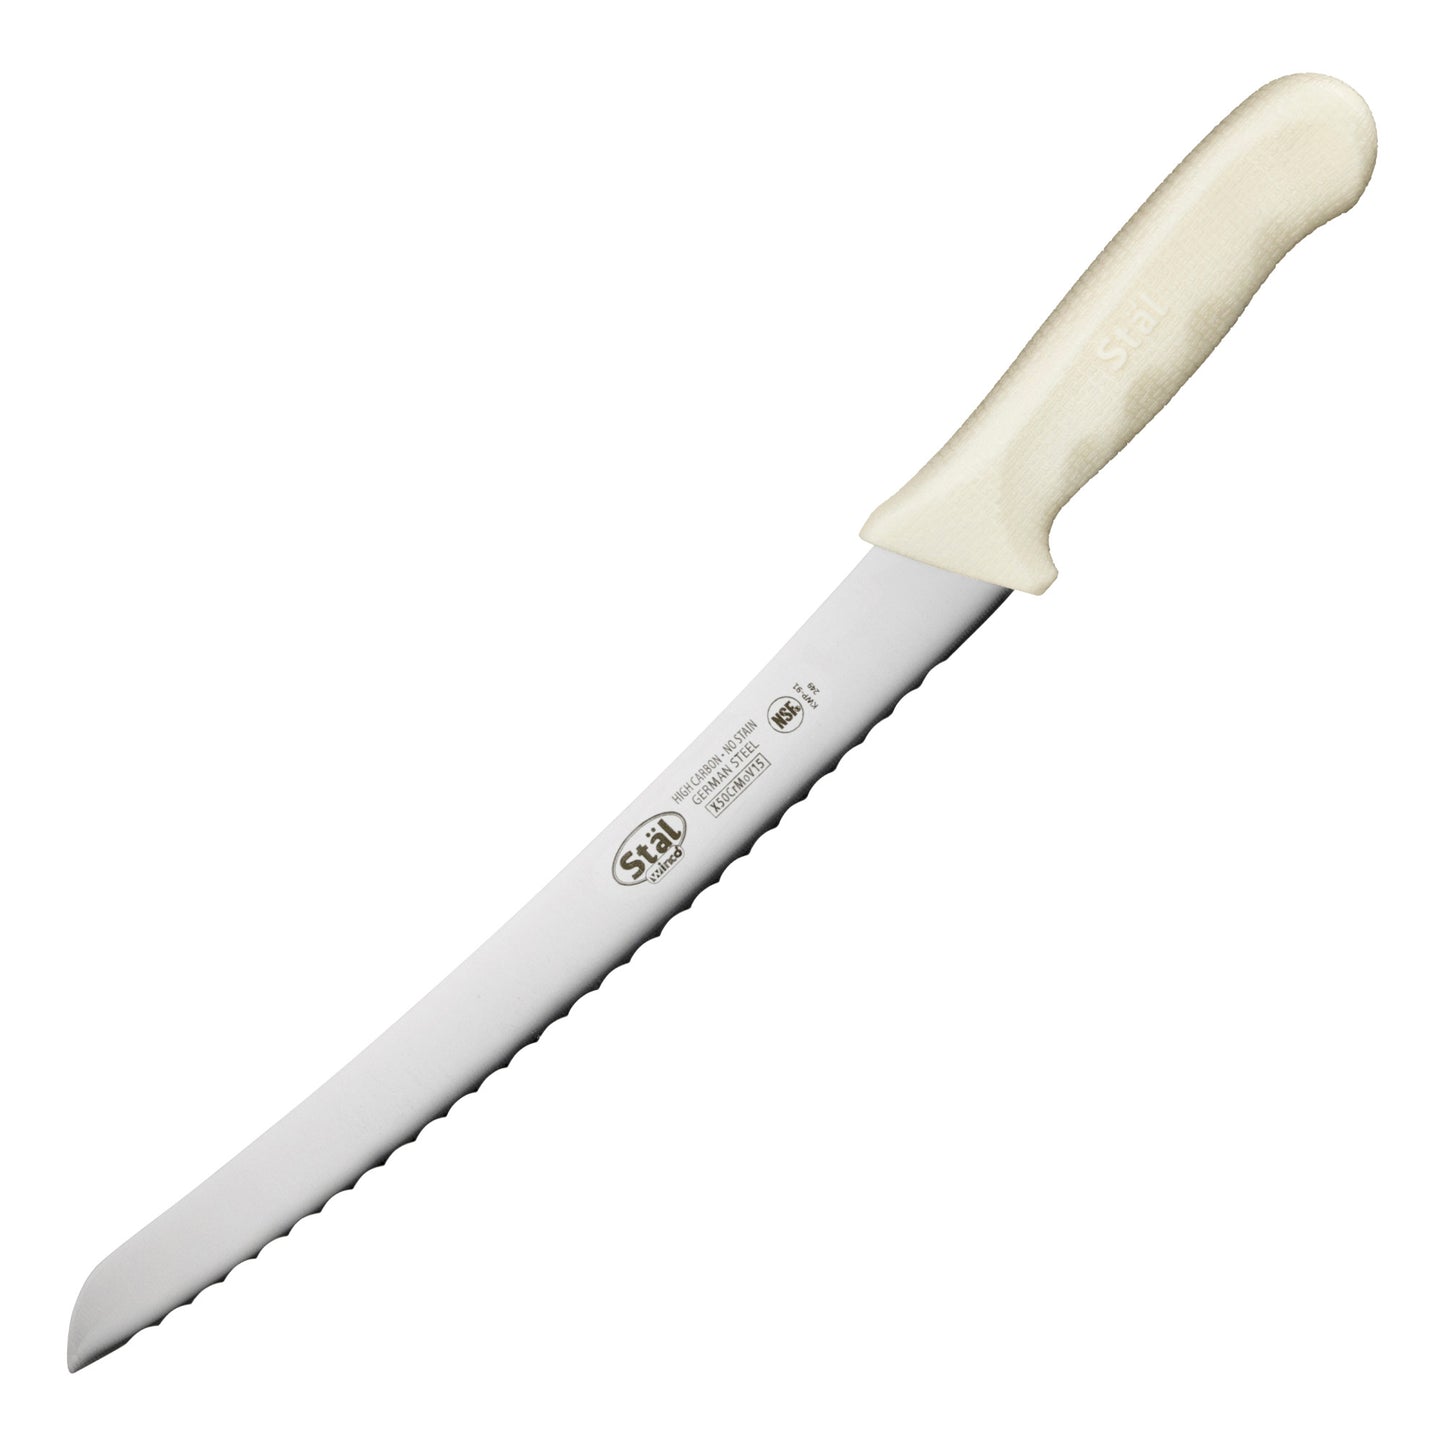 KWP-91 - 9-1/2" Bread Knife, White PP Hdl, Curved